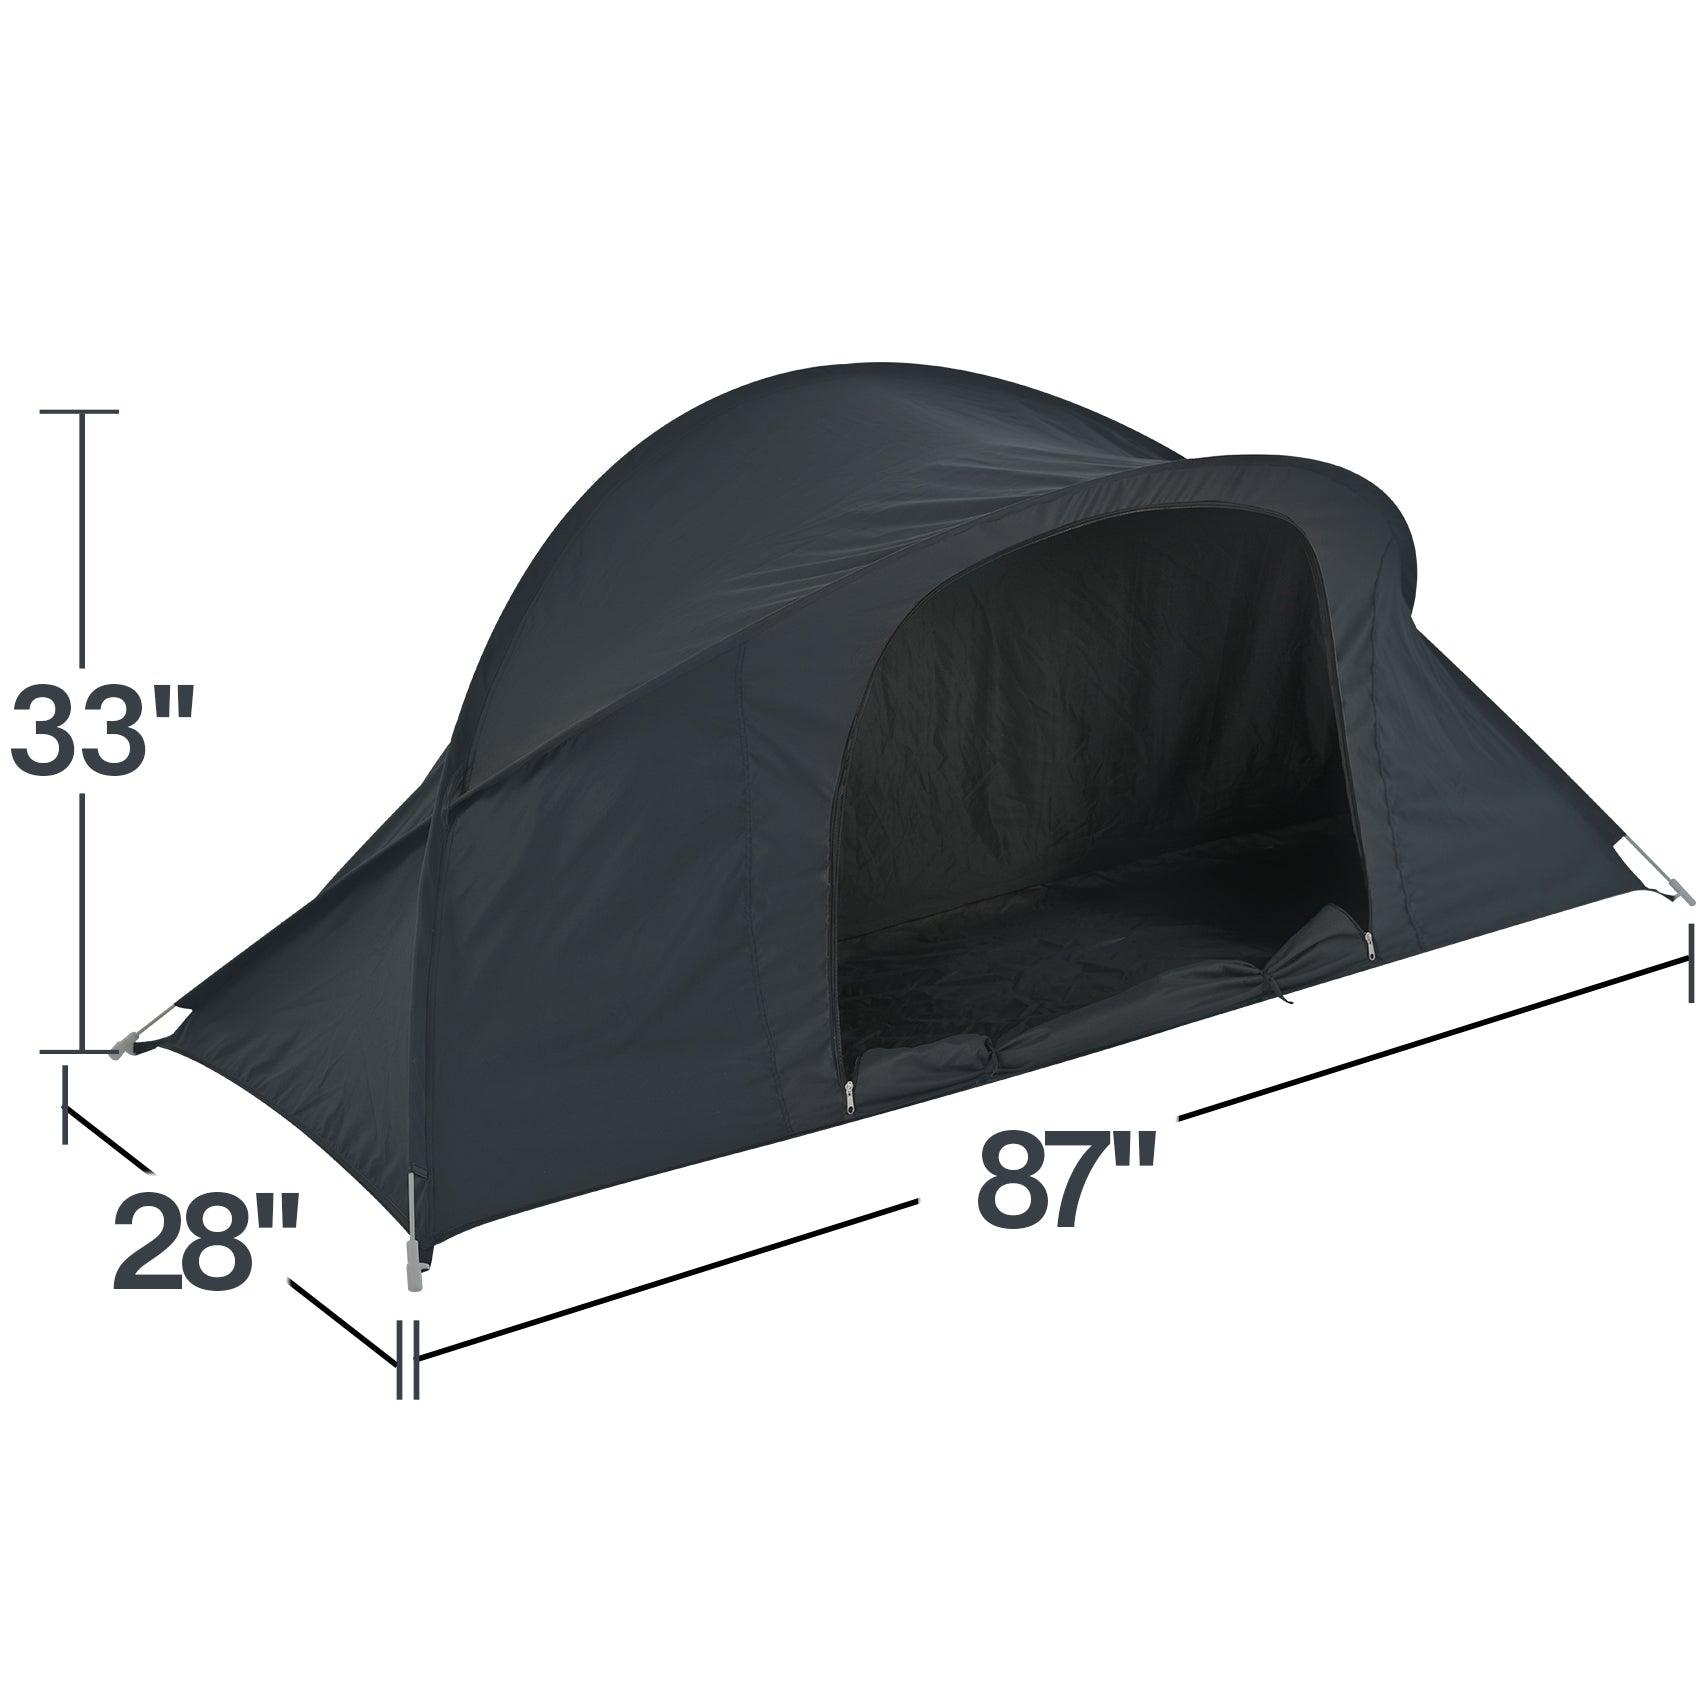 EighteenTek Pop Up Bed Canopy Office Sleeping Bed Tents One Person Privacy Space Lay Down NOT Sitting Frame 87"x28"x33"H - Alvantor